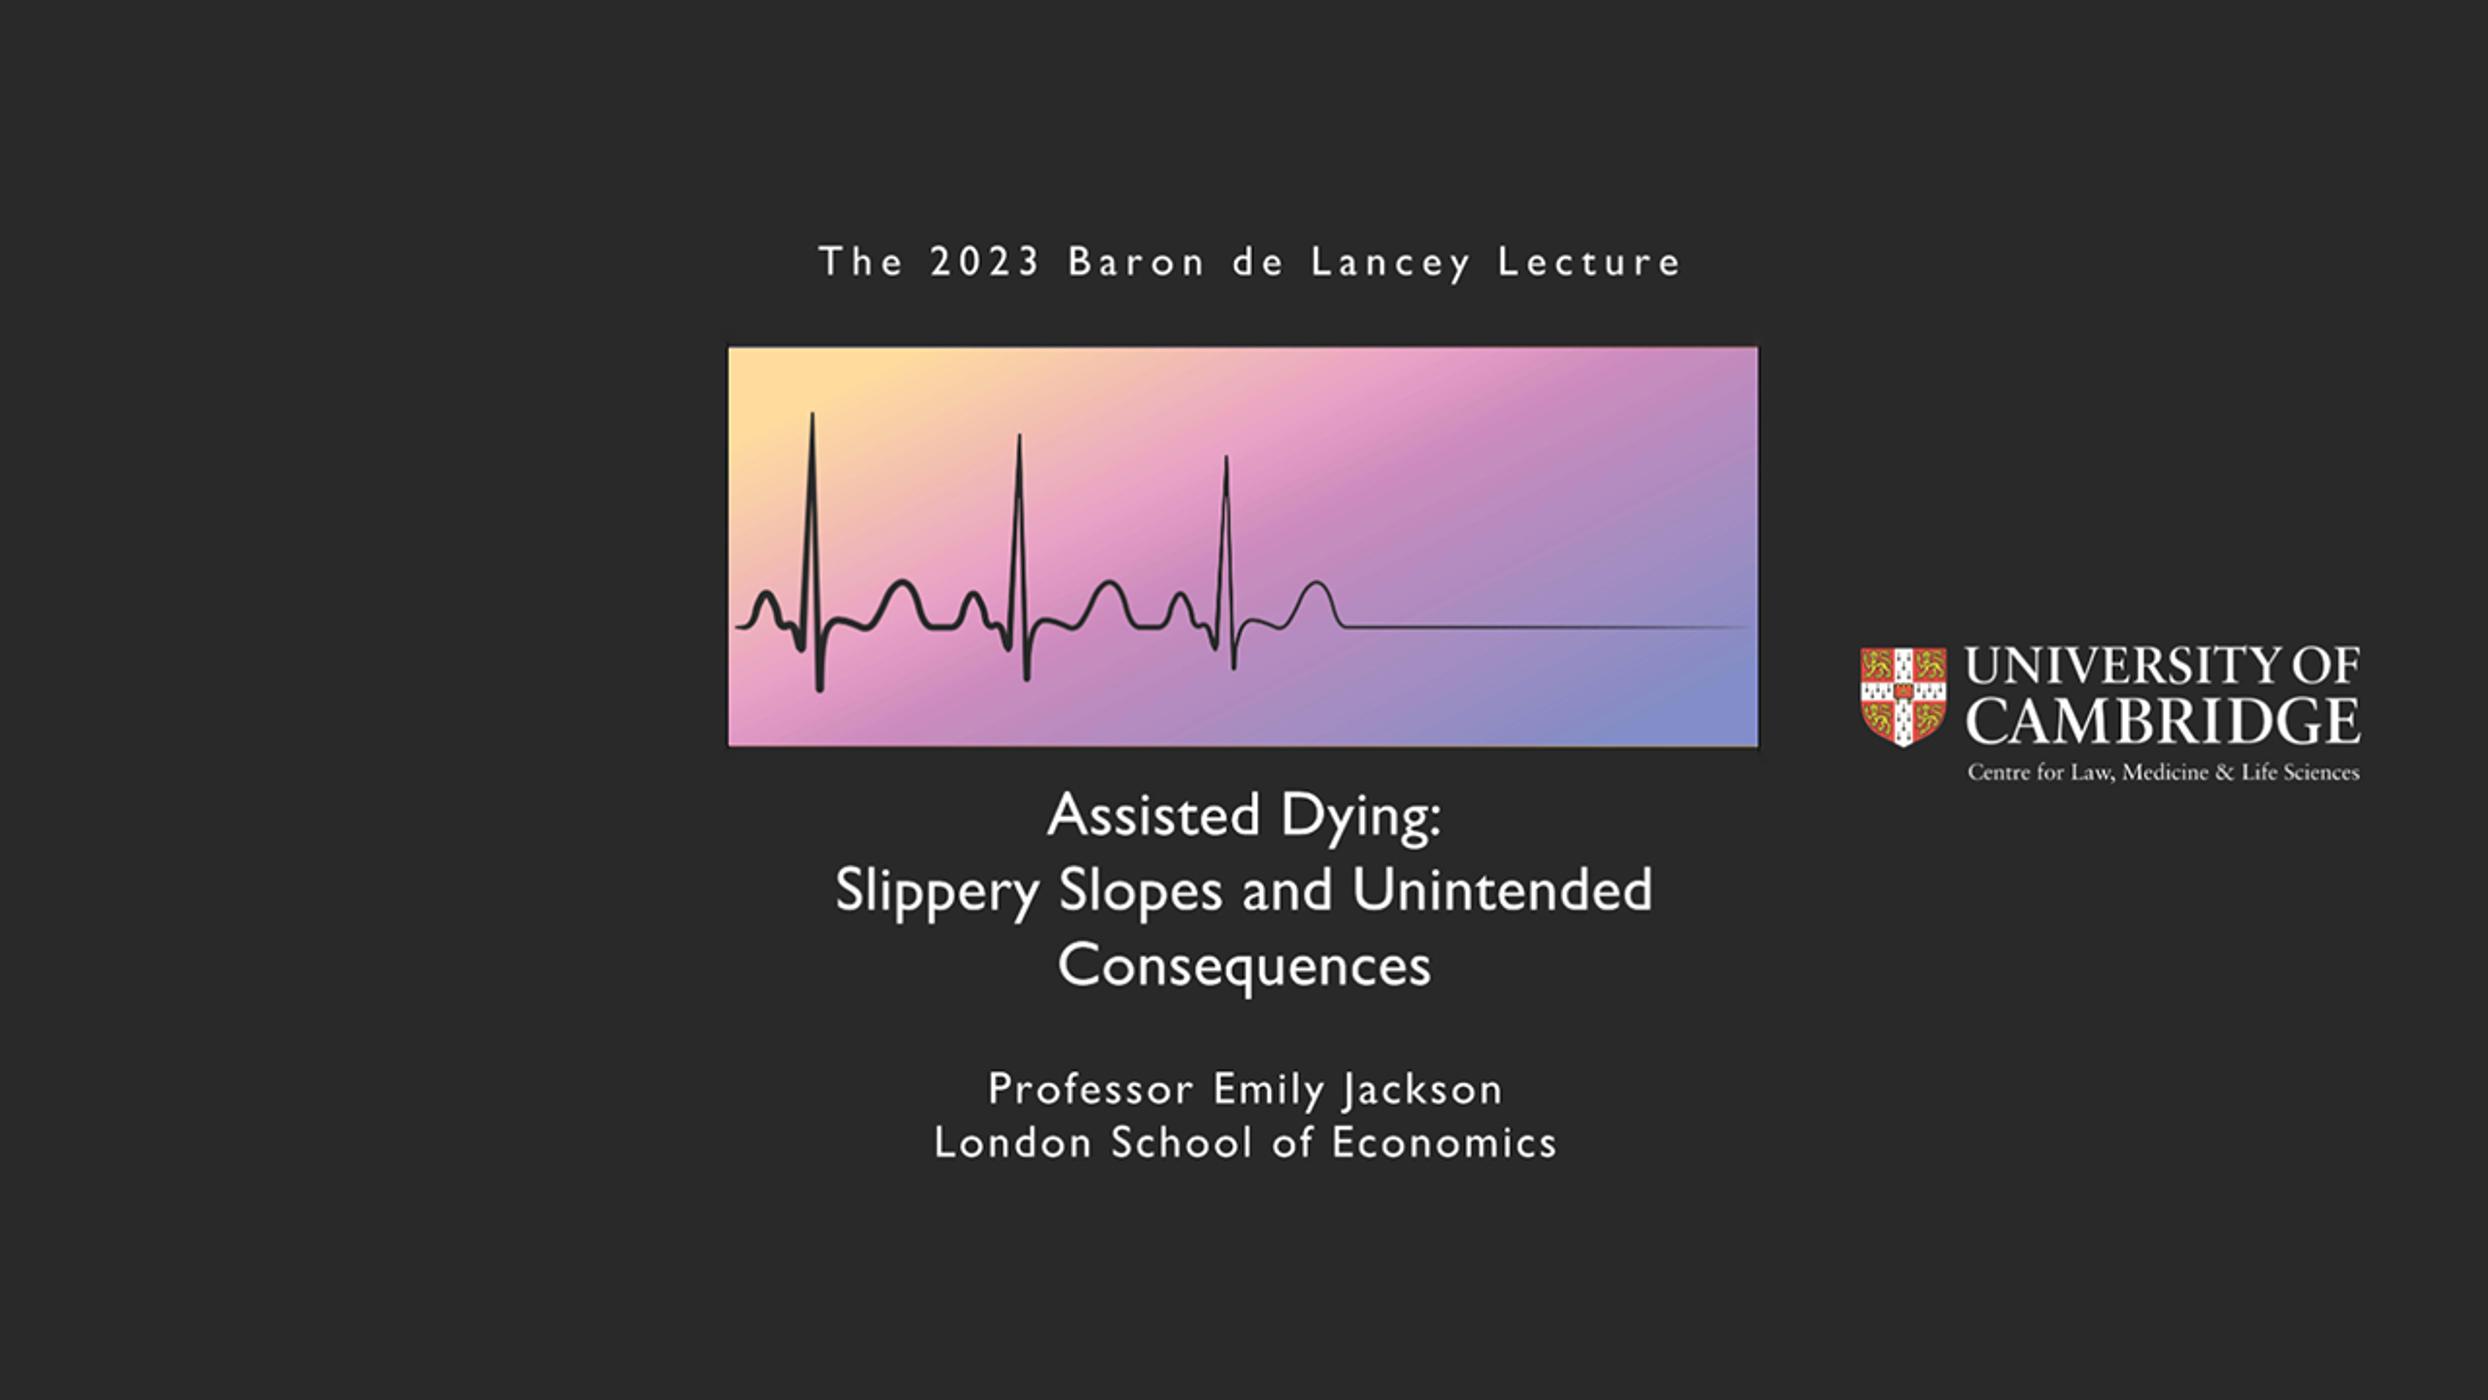 'Assisted Dying: Slippery Slopes and Unintended Consequences': The Baron de Lancey Lecture 2023